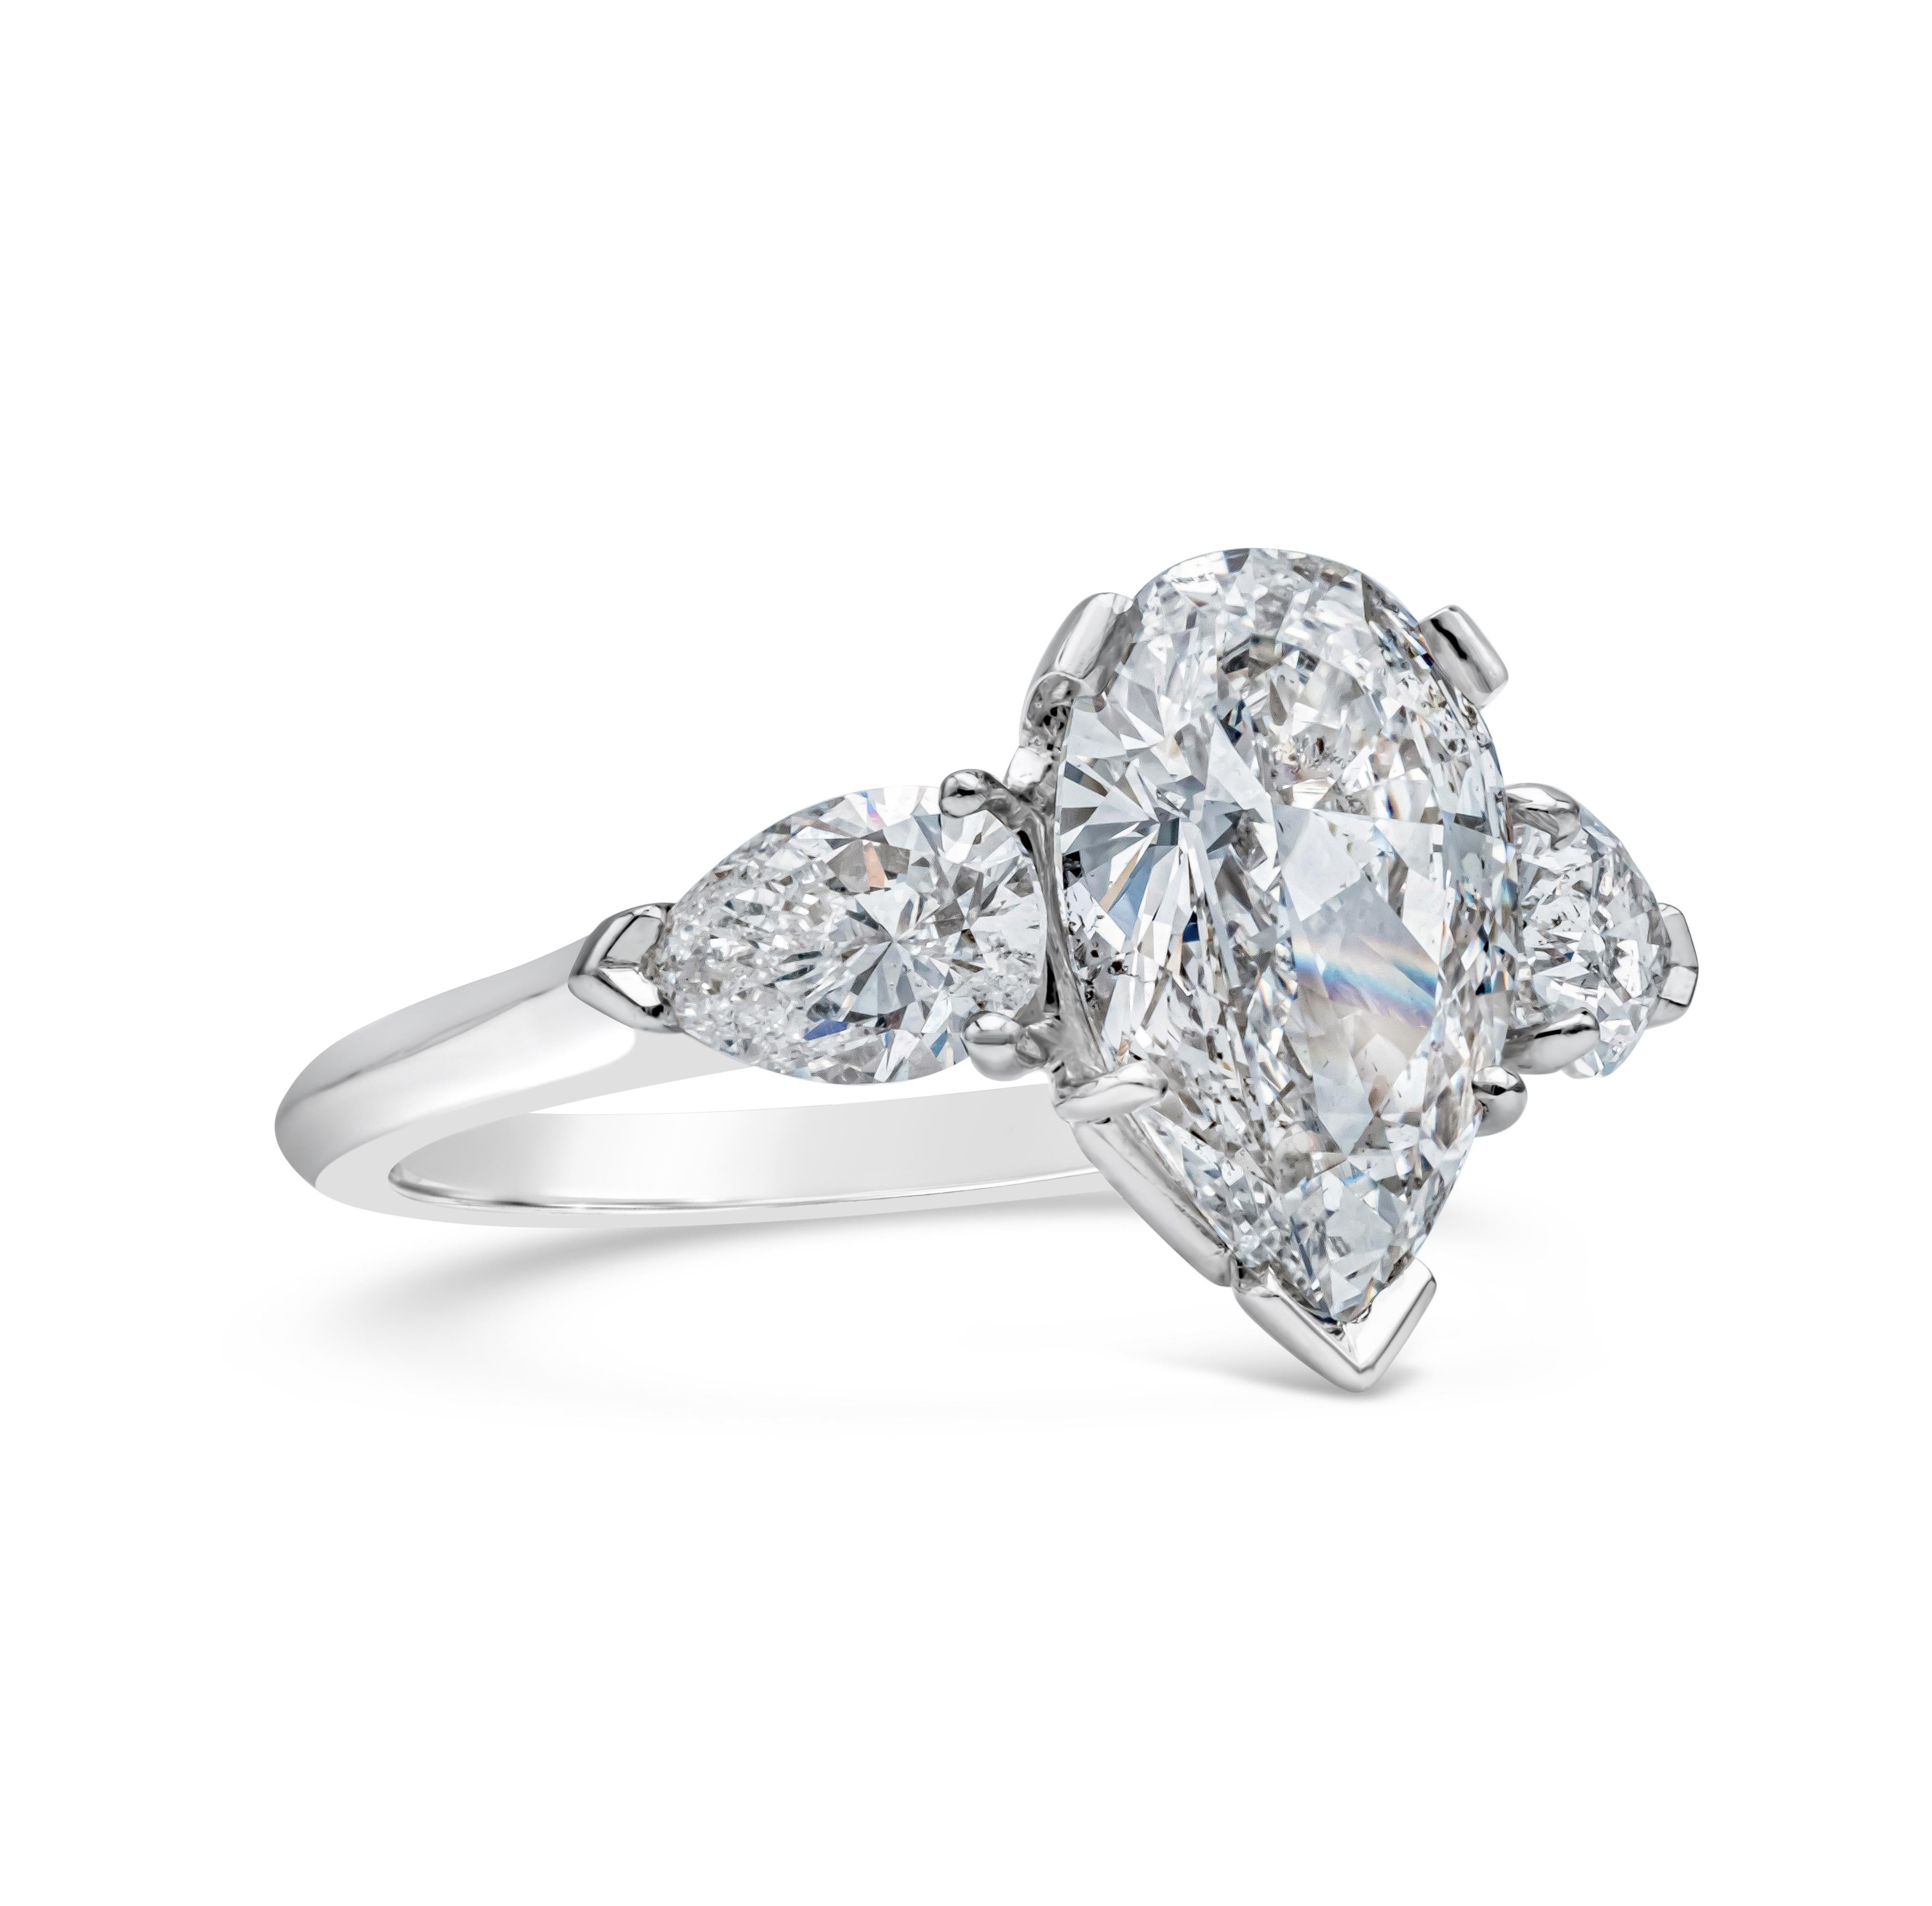 A chic three-stone engagement ring style showcasing a 1.88 carats pear shape diamond center stone certified by GIA as F color and SI2 in clarity. Flanked by two melee pear shape diamond on each side weighing 0.91 carats total. Set in a polished